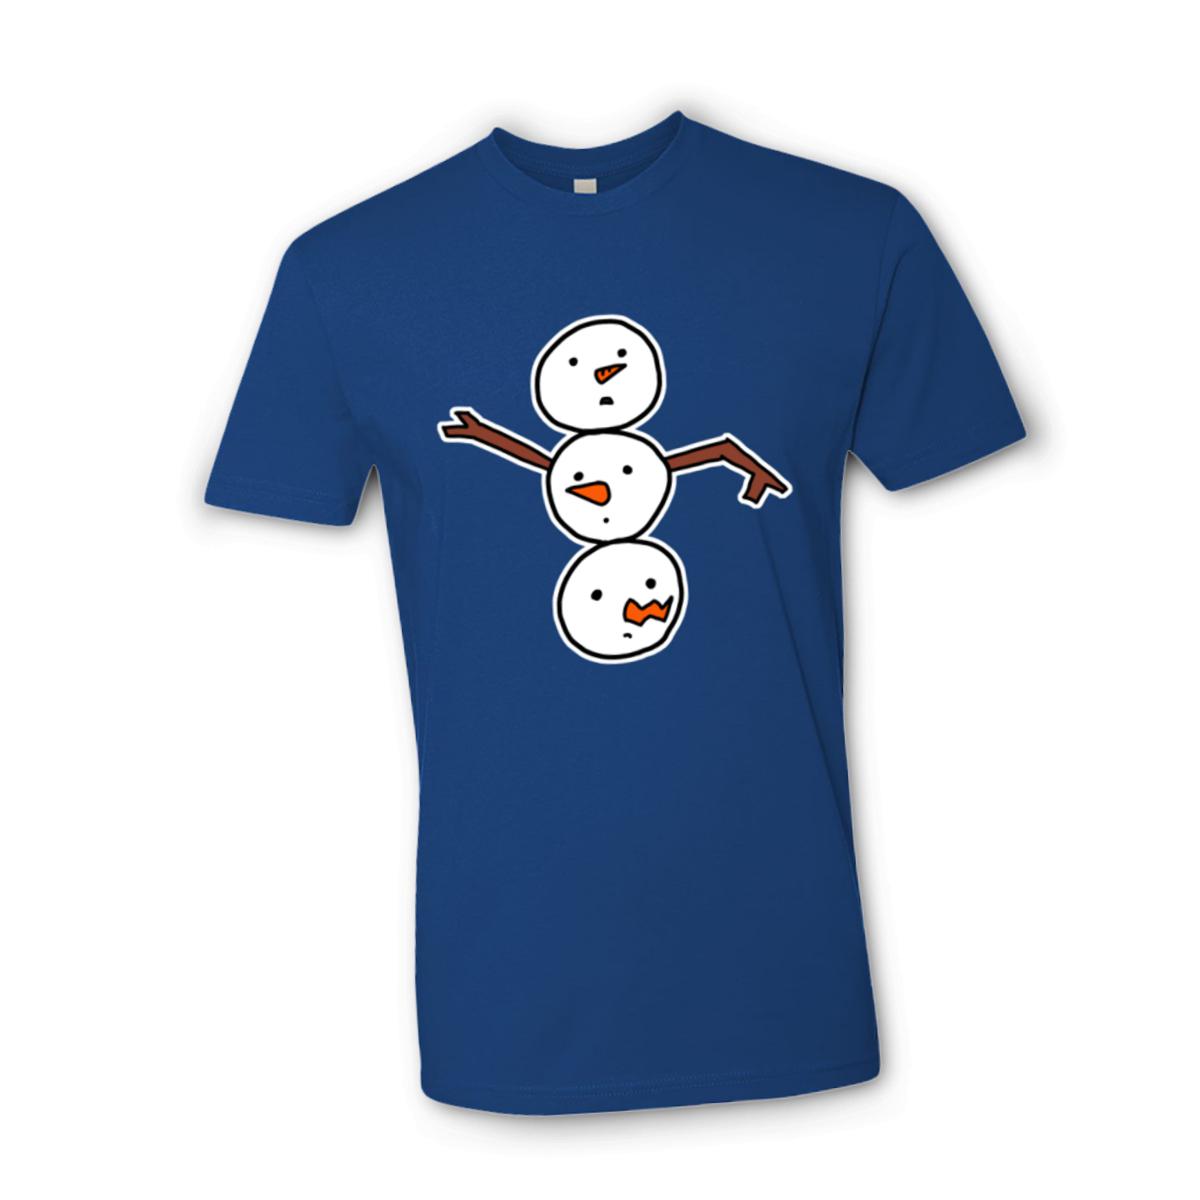 Snowman All Heads Unisex Tee Double Extra Large royal-blue